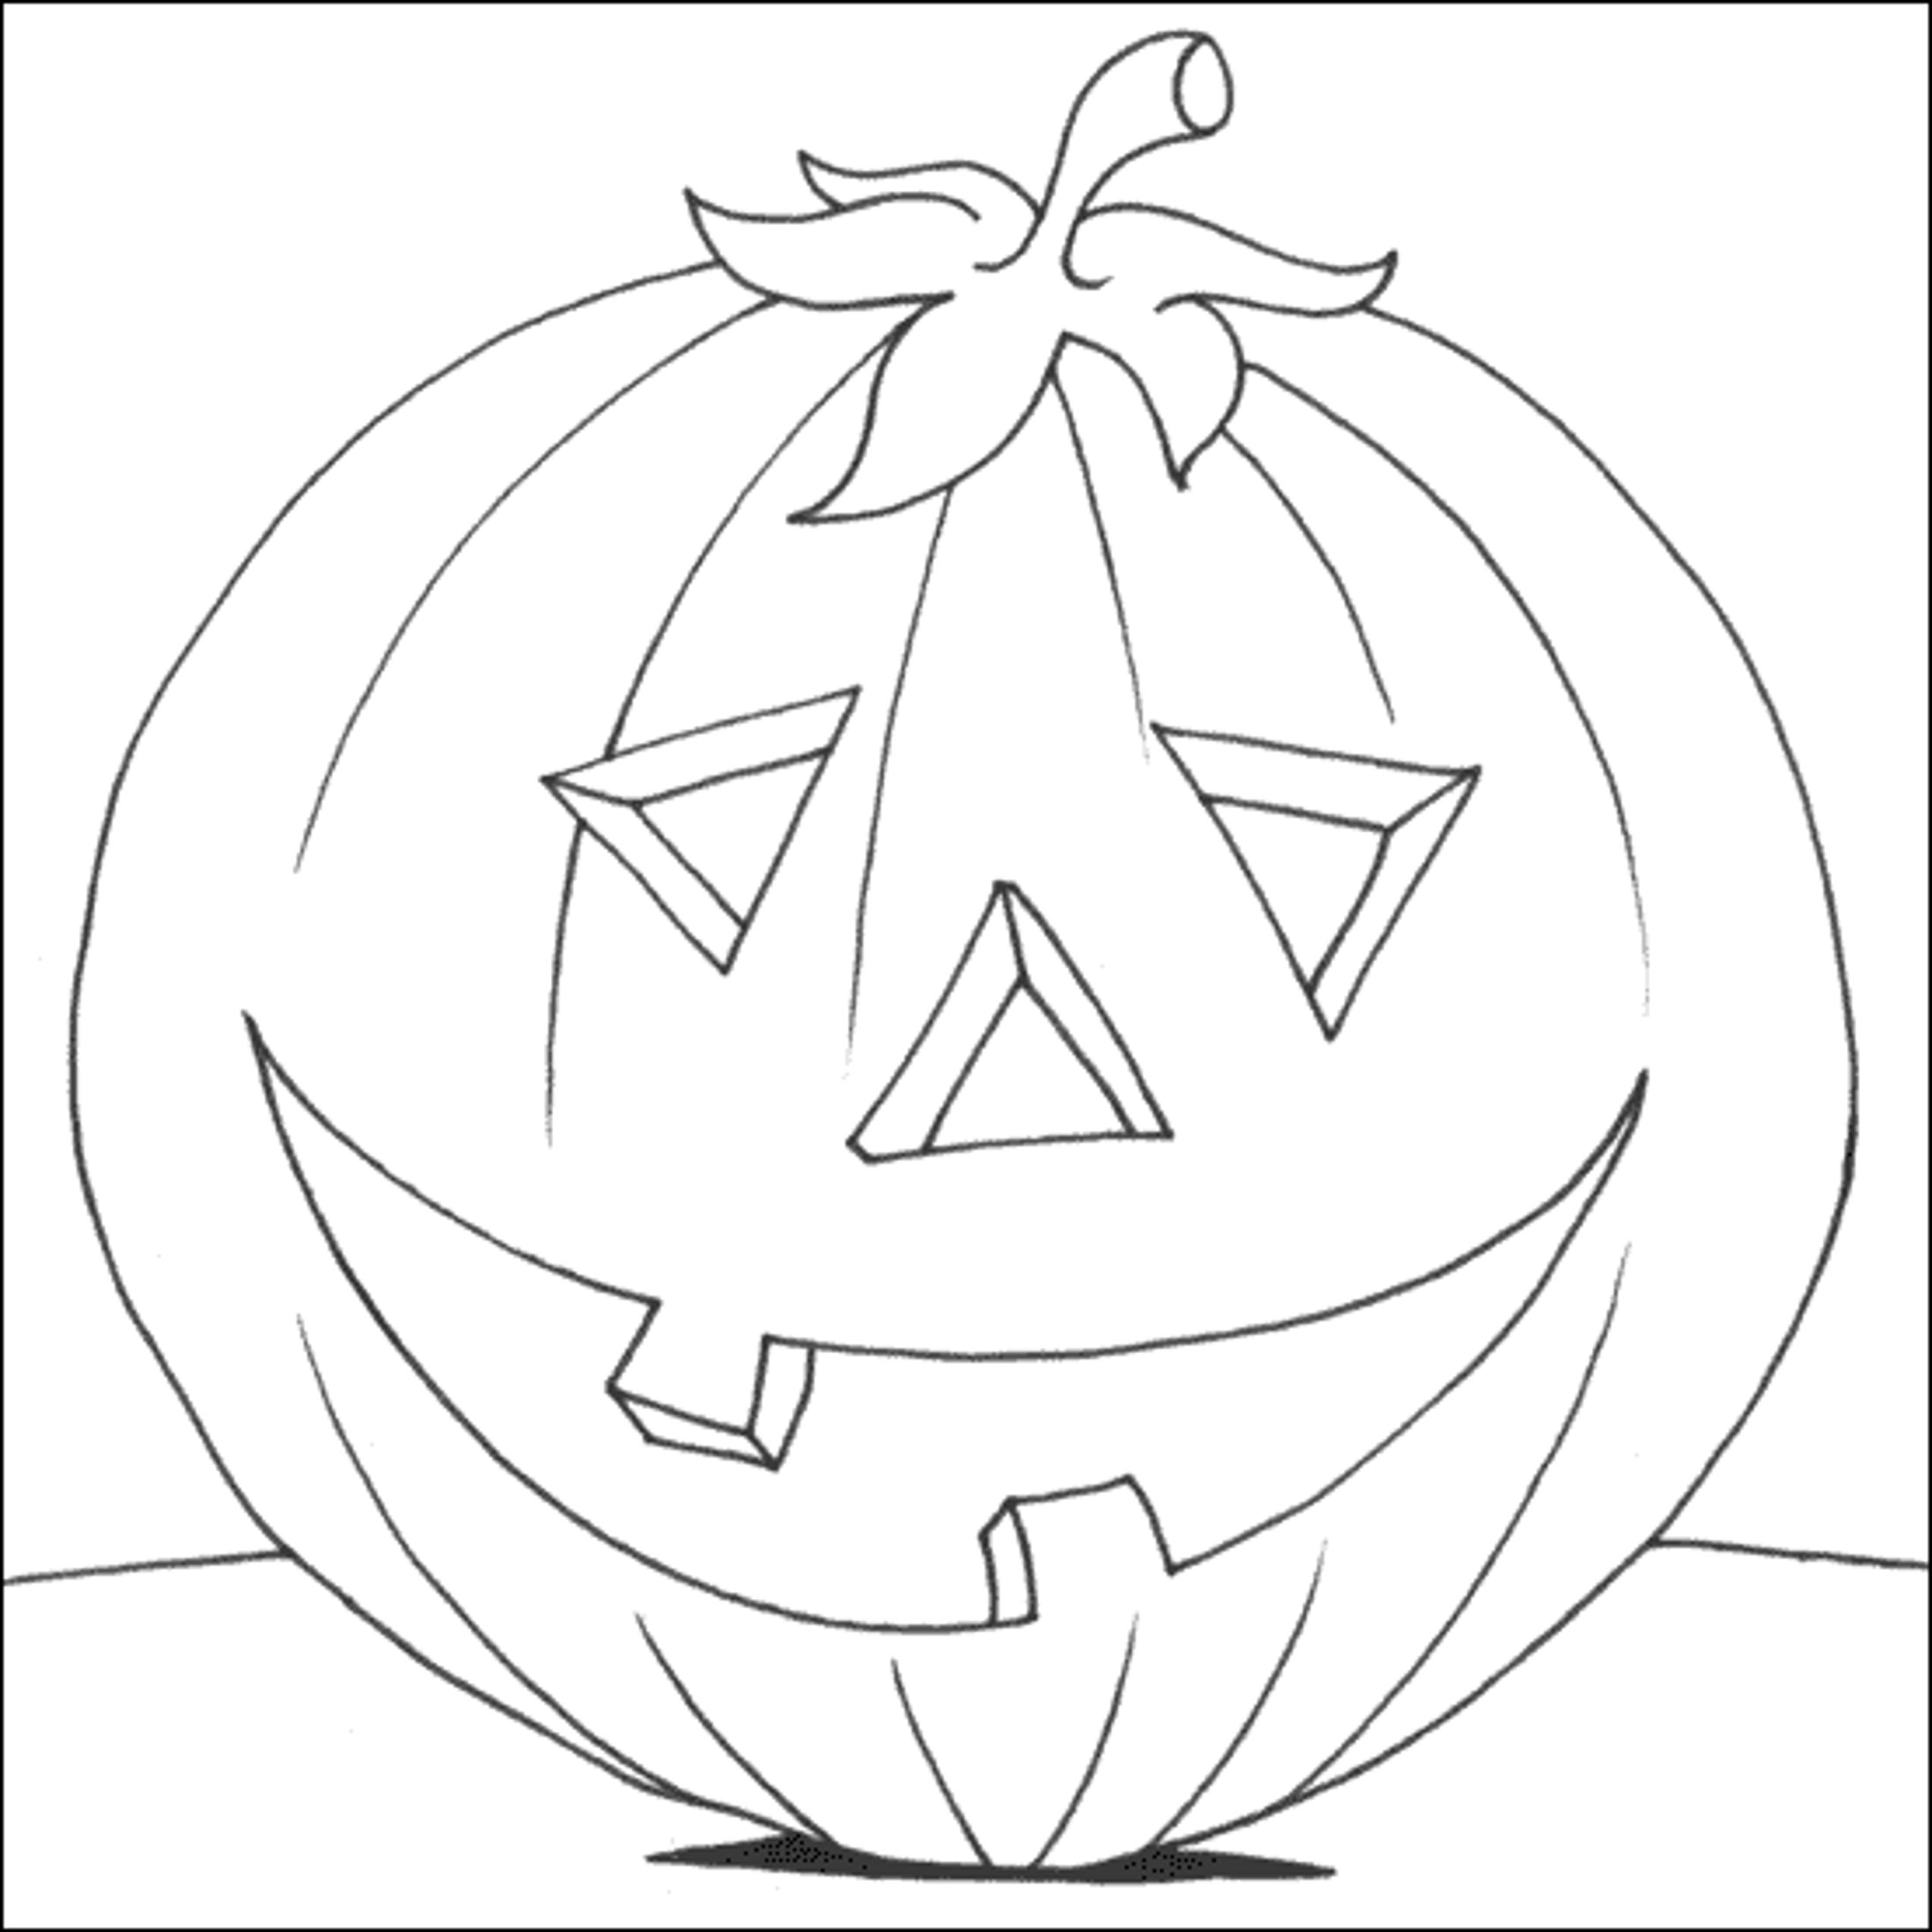 Coloring page: Pumpkin (Objects) #167069 - Free Printable Coloring Pages